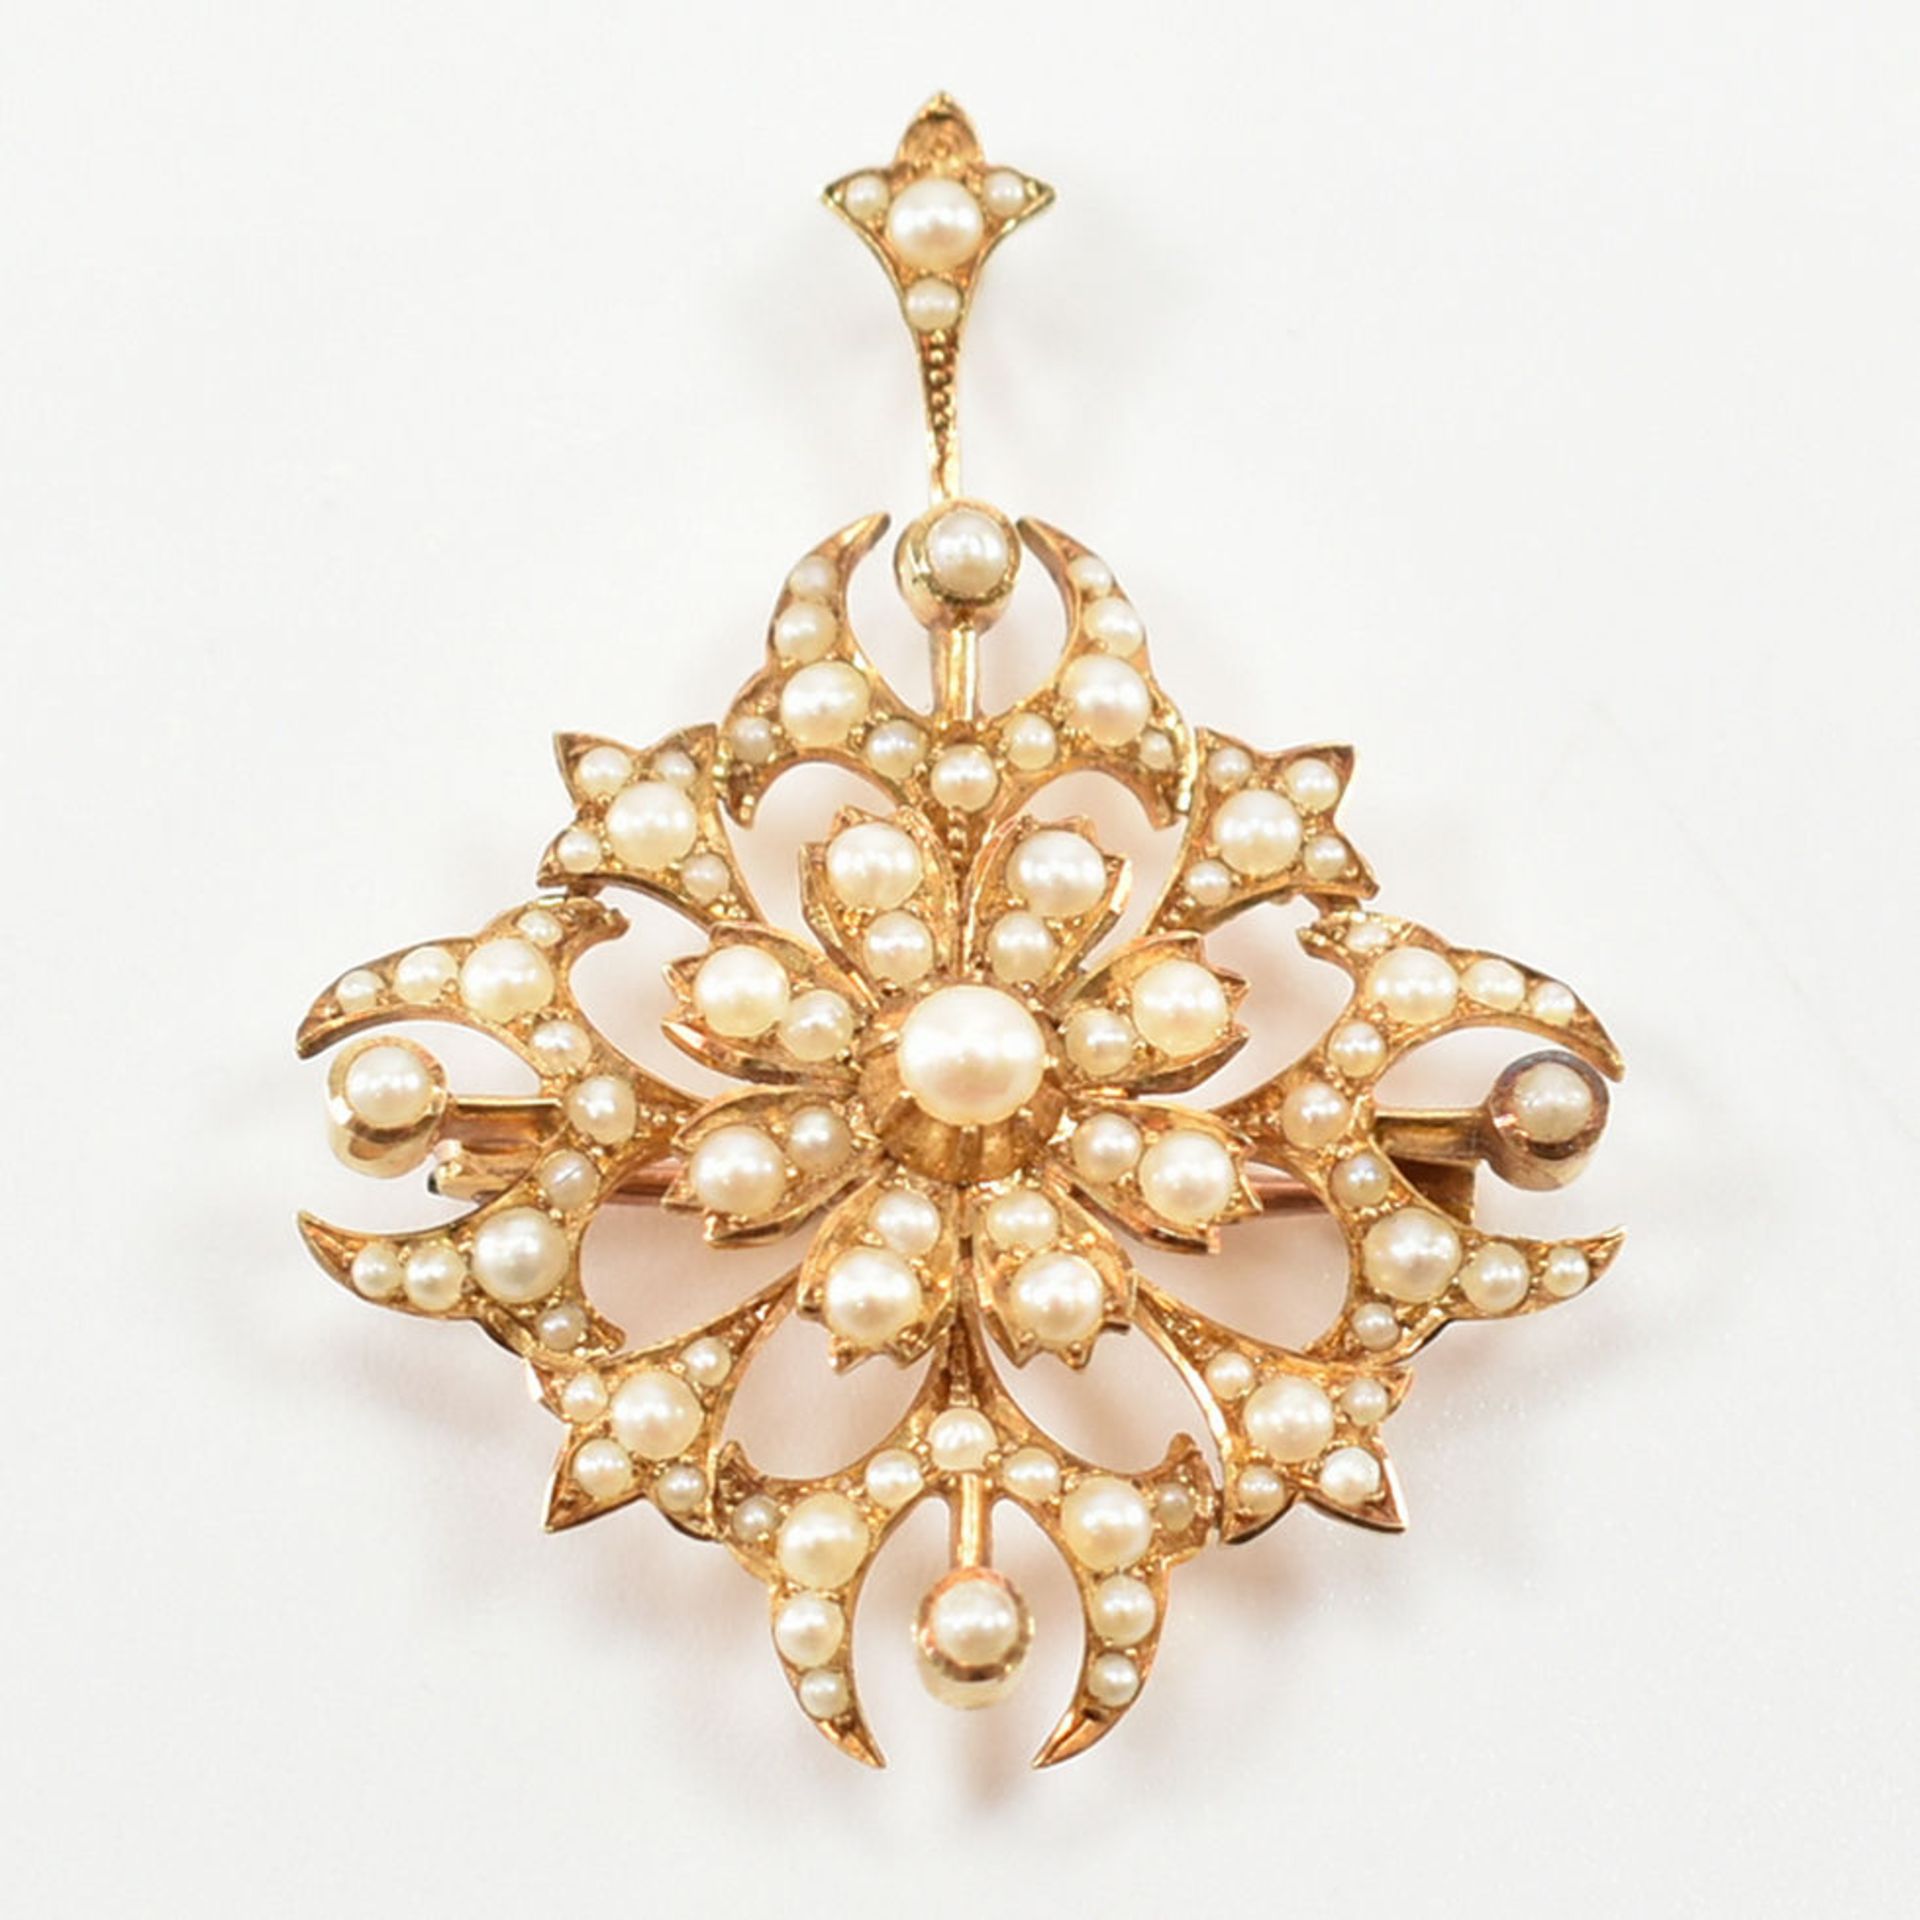 VICTORIAN 15CT GOLD & SEED PEARL PENDANT BROOCH